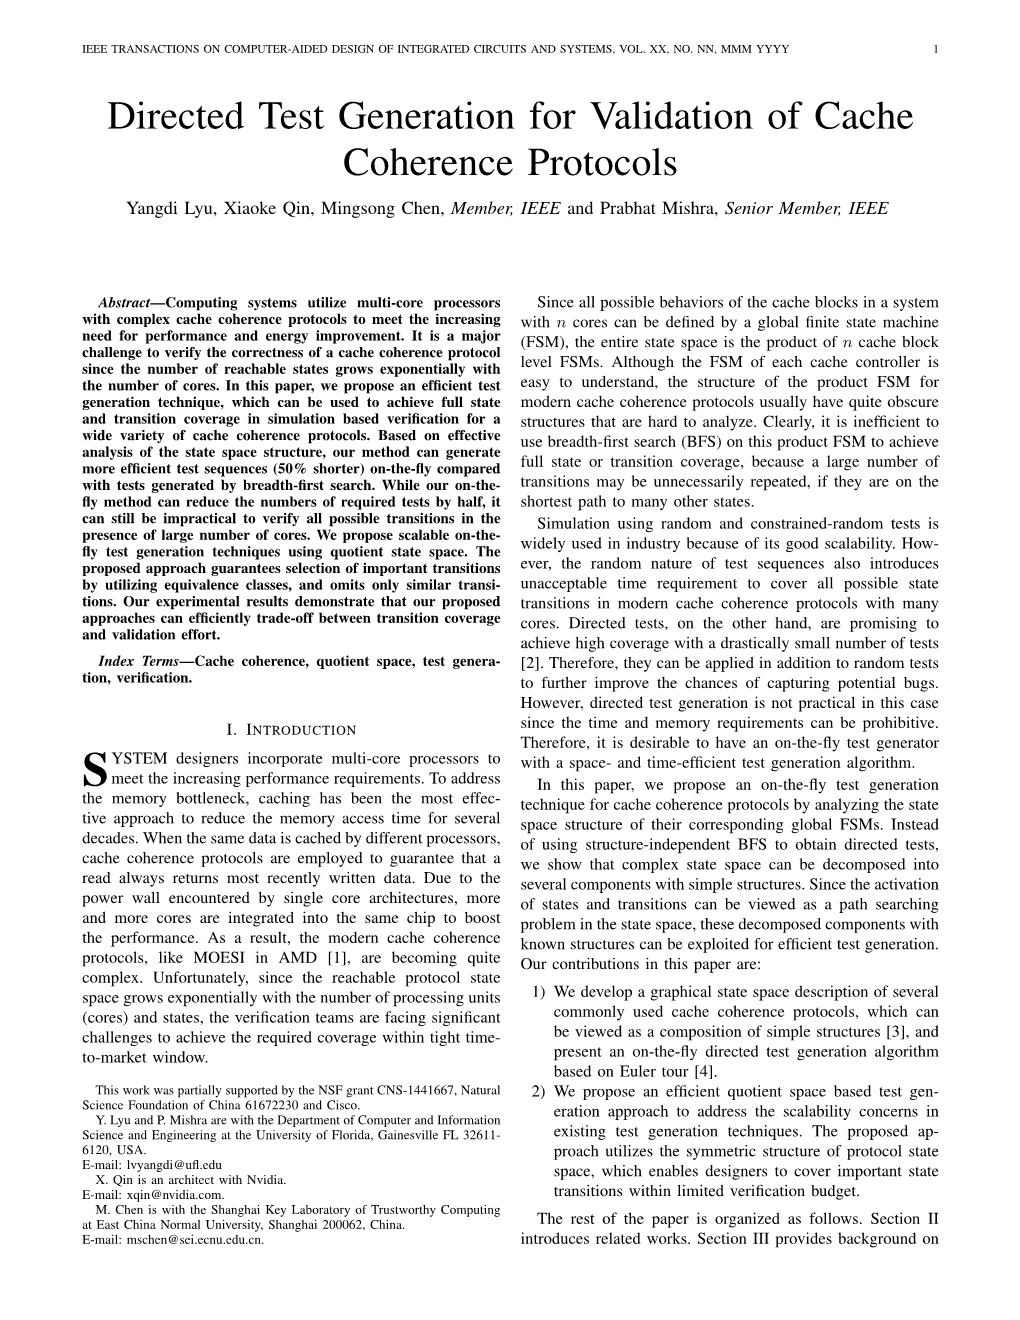 Directed Test Generation for Validation of Cache Coherence Protocols Yangdi Lyu, Xiaoke Qin, Mingsong Chen, Member, IEEE and Prabhat Mishra, Senior Member, IEEE